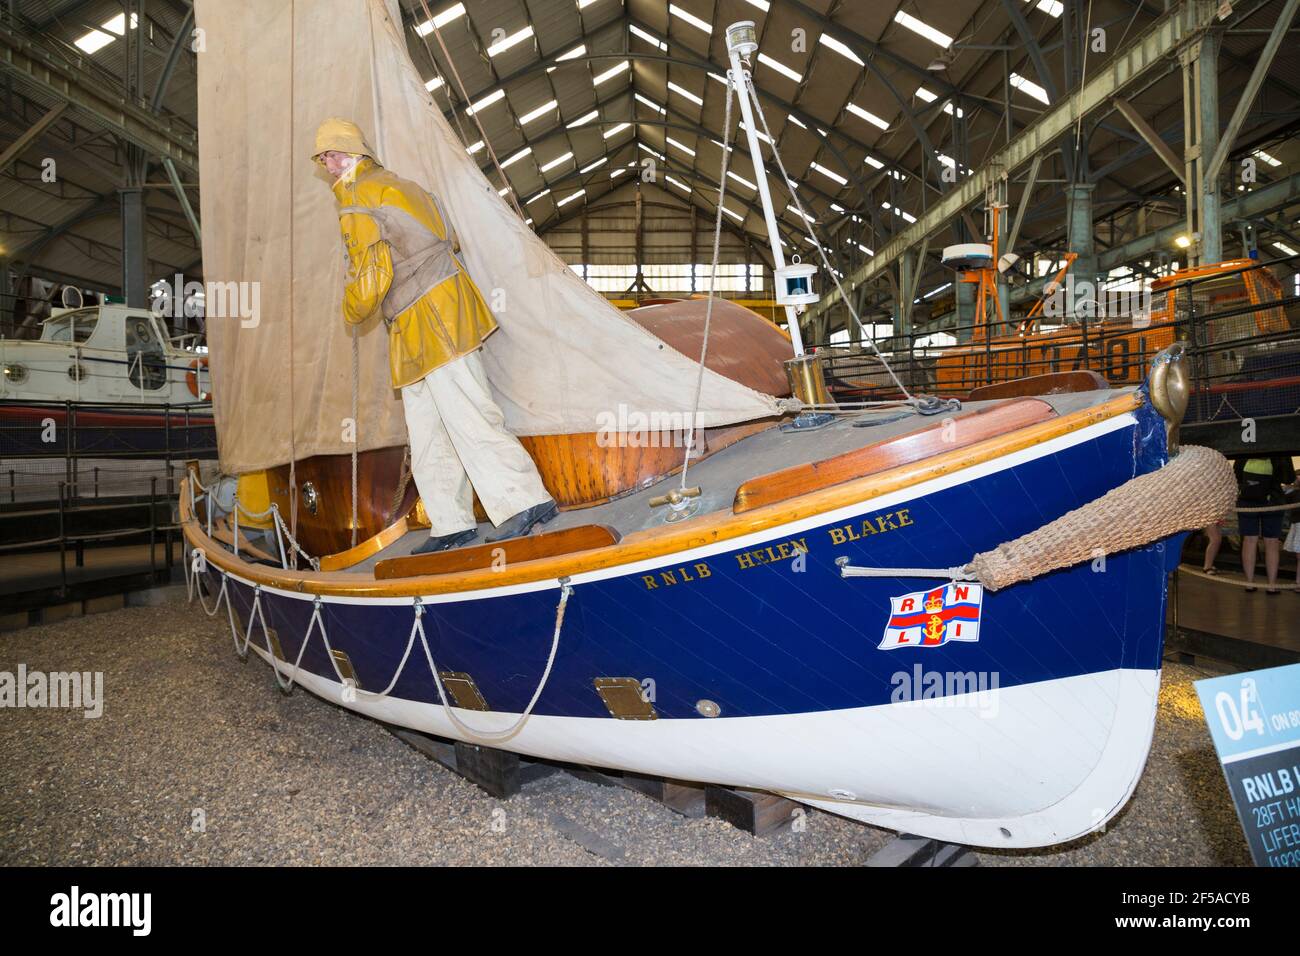 Old vintage historic RNLB Helen Blake Lifeboat on display at Number Four Boat House / Boathouse Number 4 at Historic Dockyard / Dockyards Chatham in Kent. UK (121) Stock Photo